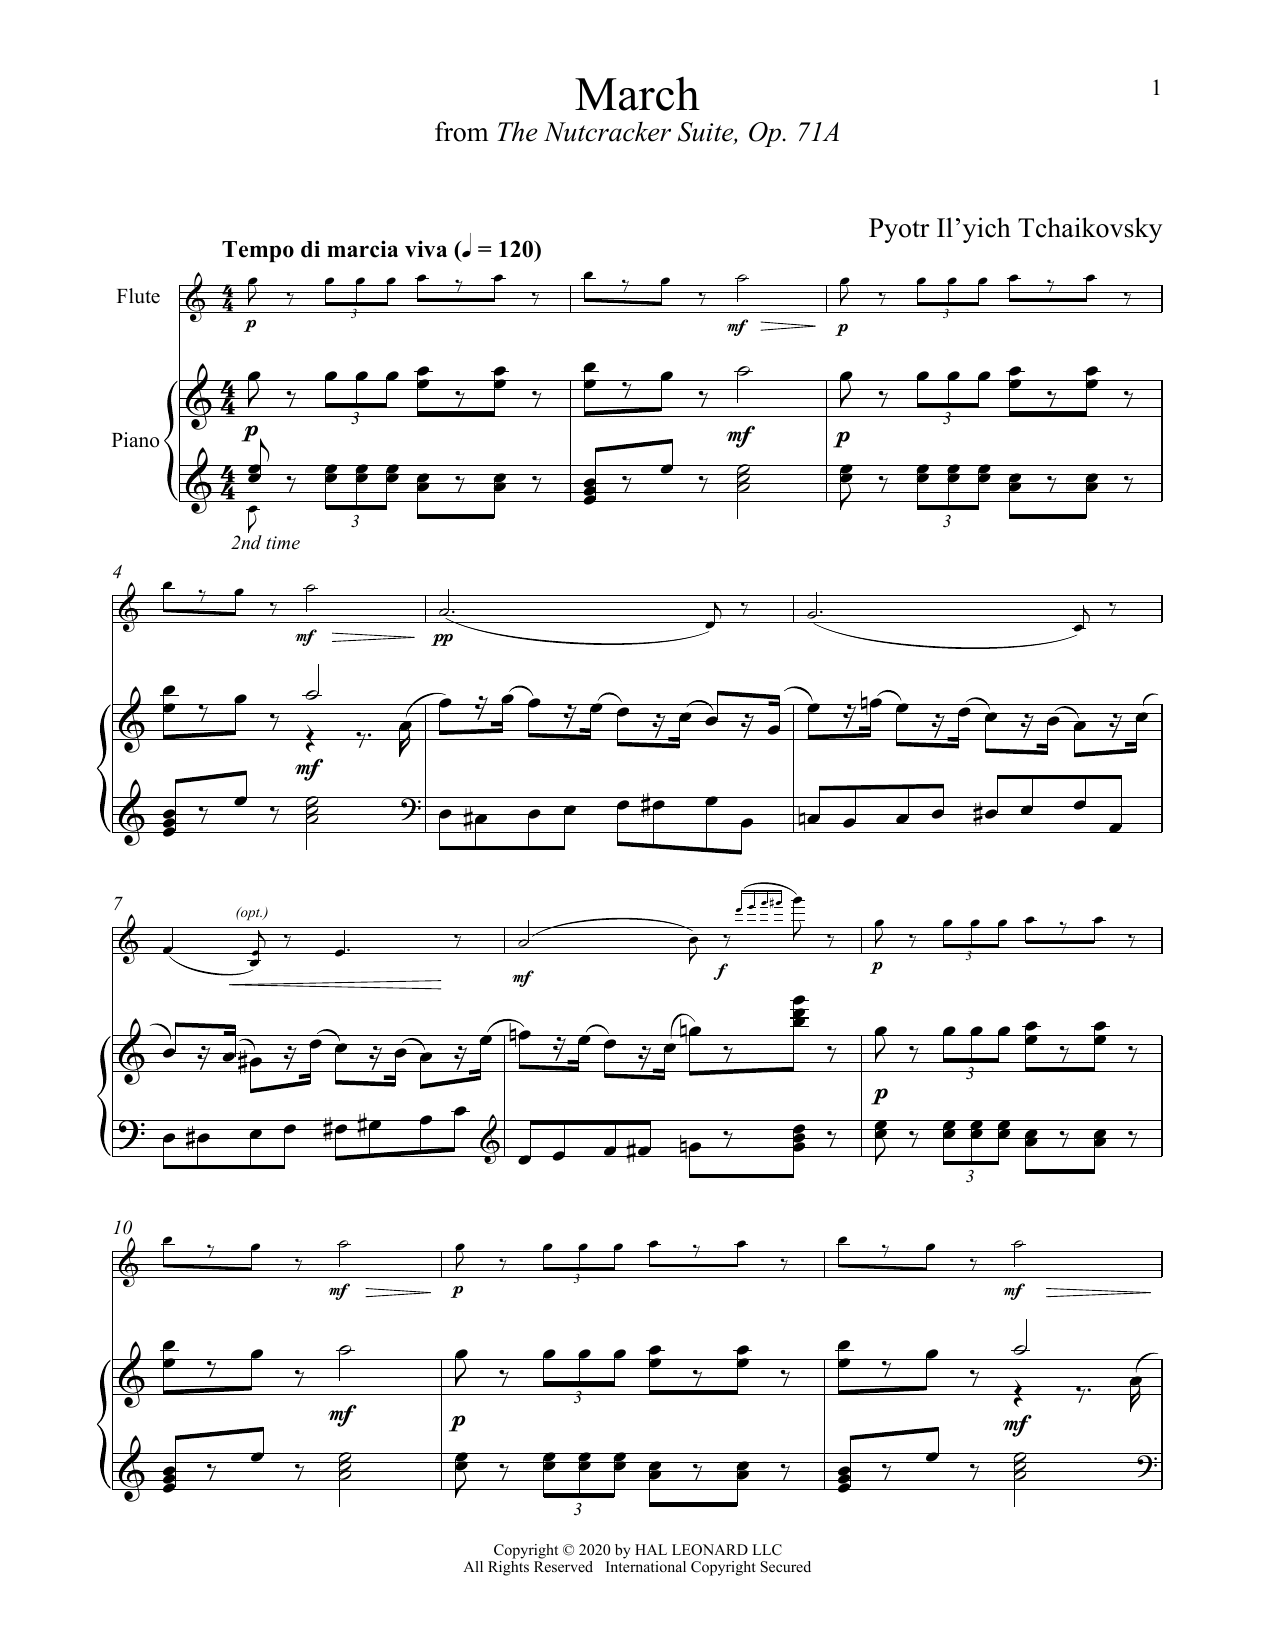 Download Pyotr Il'yich Tchaikovsky March, Op. 71a (from The Nutcracker) Sheet Music